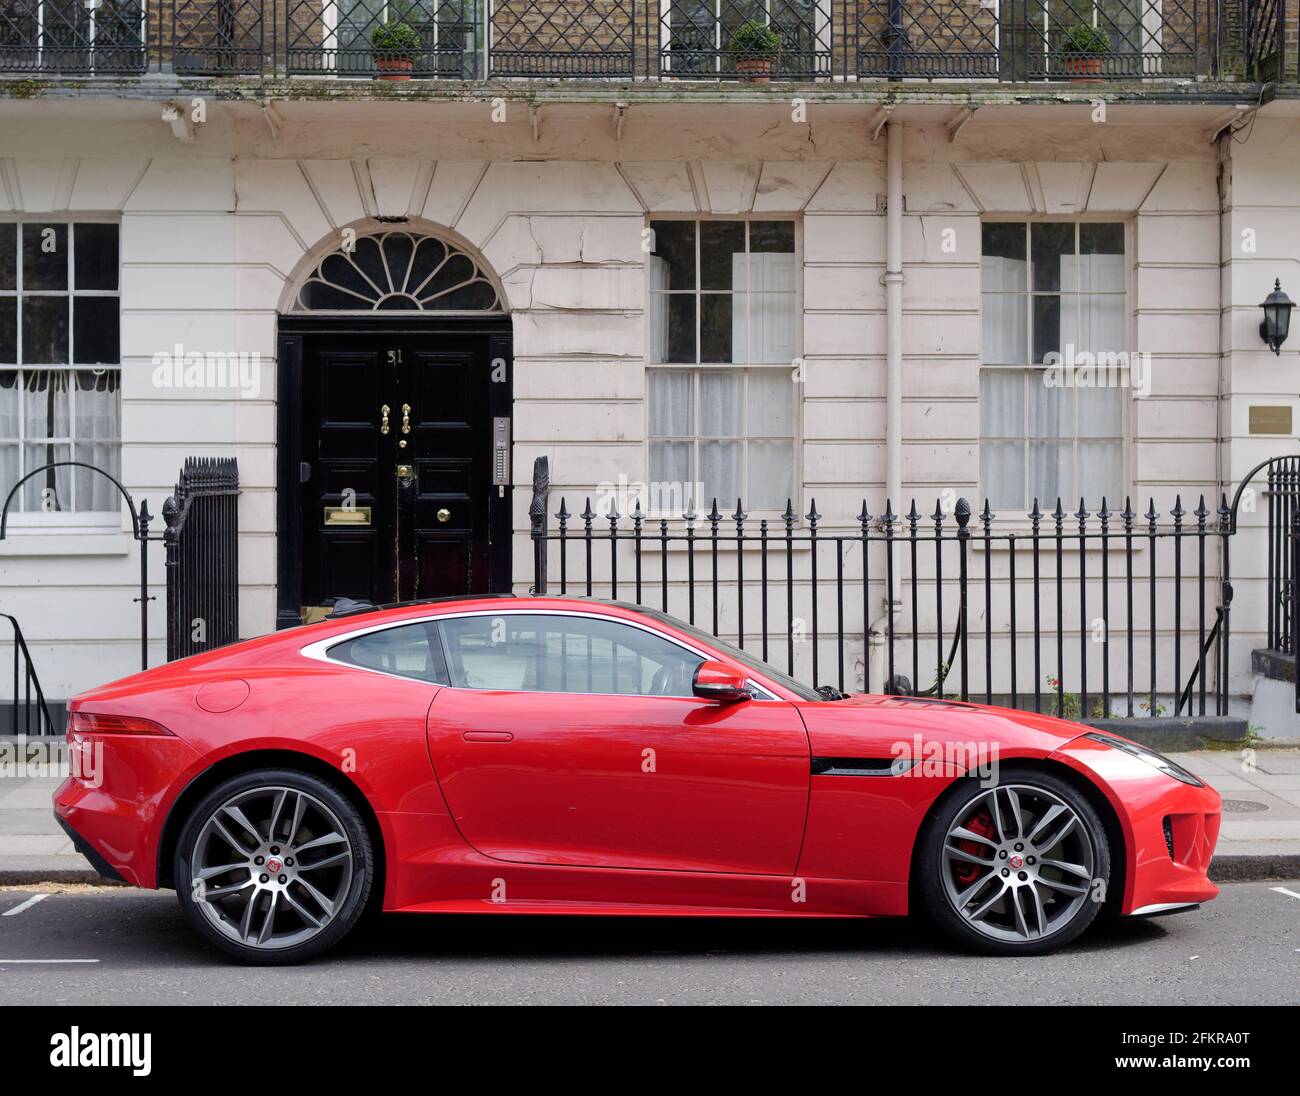 London, Greater London, England - Apr 27 2021: Red sportscar parked outside a residential property with railings and balcony. Stock Photo